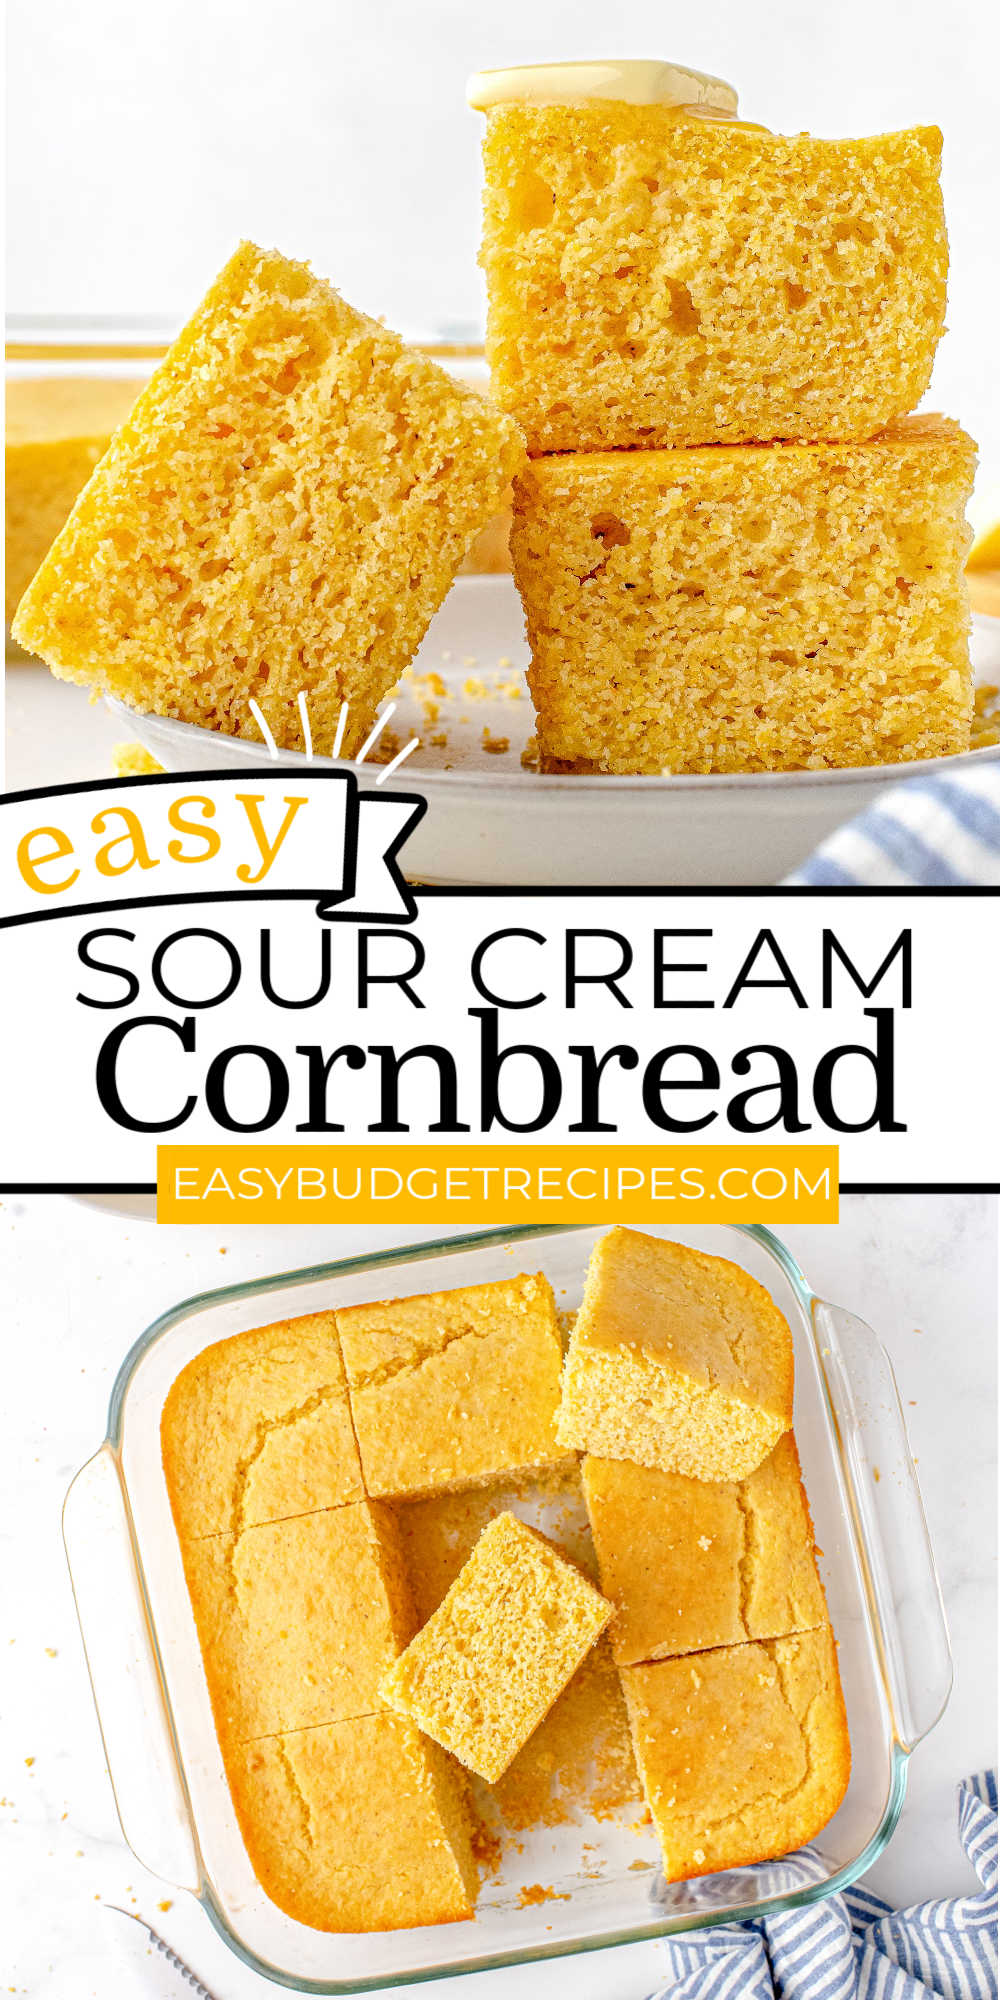 This Sour Cream Cornbread recipe is so moist, delicious, and not overly sweet. It’s super easy to make, the entire family will love it, and it's simply the best! via @foodfolksandfun